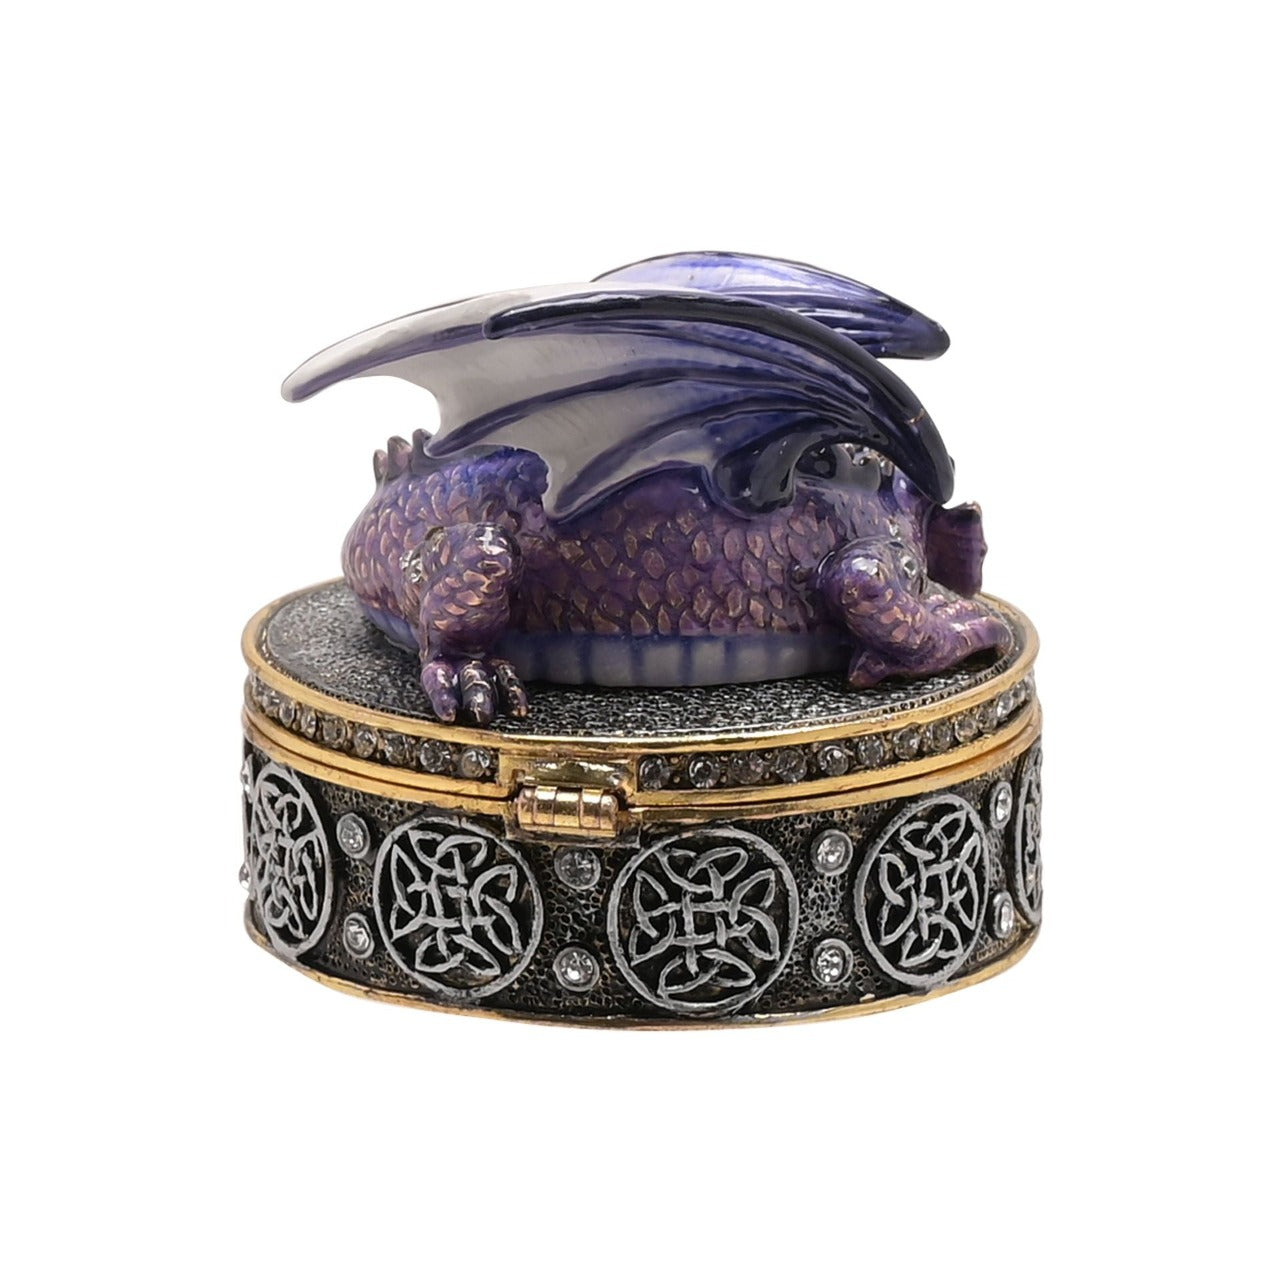 Gothic Purple Dragon Jewllery Box  A gothic purple dragon jewellery box by THE SEASONAL GIFT CO®.  This majestic jewellery box captures the mythical world of dragons for those obsessed with fantasy.